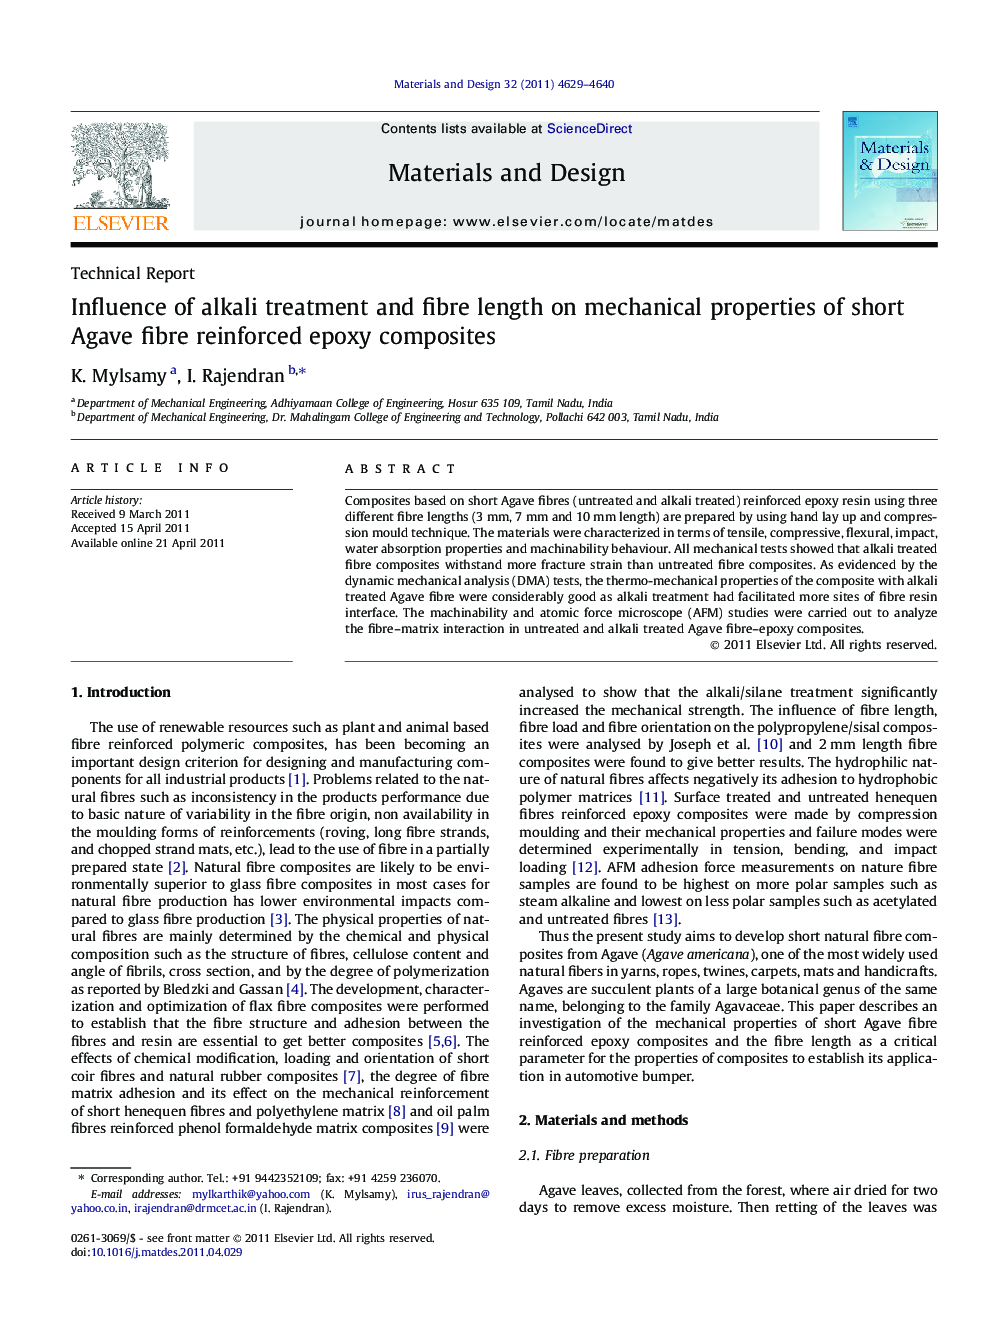 Influence of alkali treatment and fibre length on mechanical properties of short Agave fibre reinforced epoxy composites